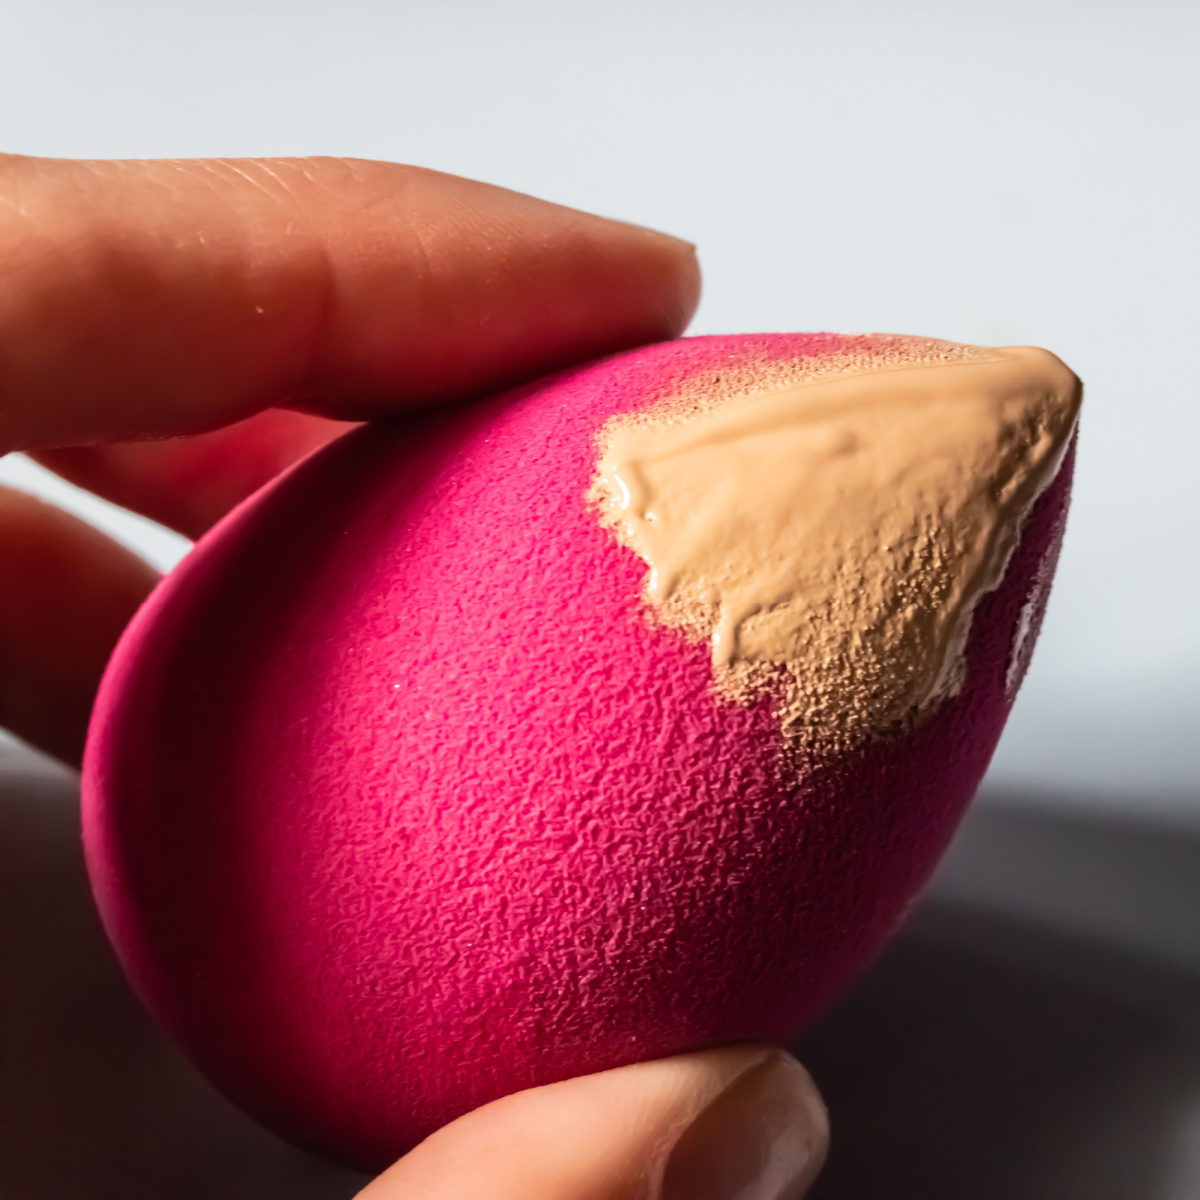 pink makeup sponge with concealer product on it dabbed finger holding cosmetic product